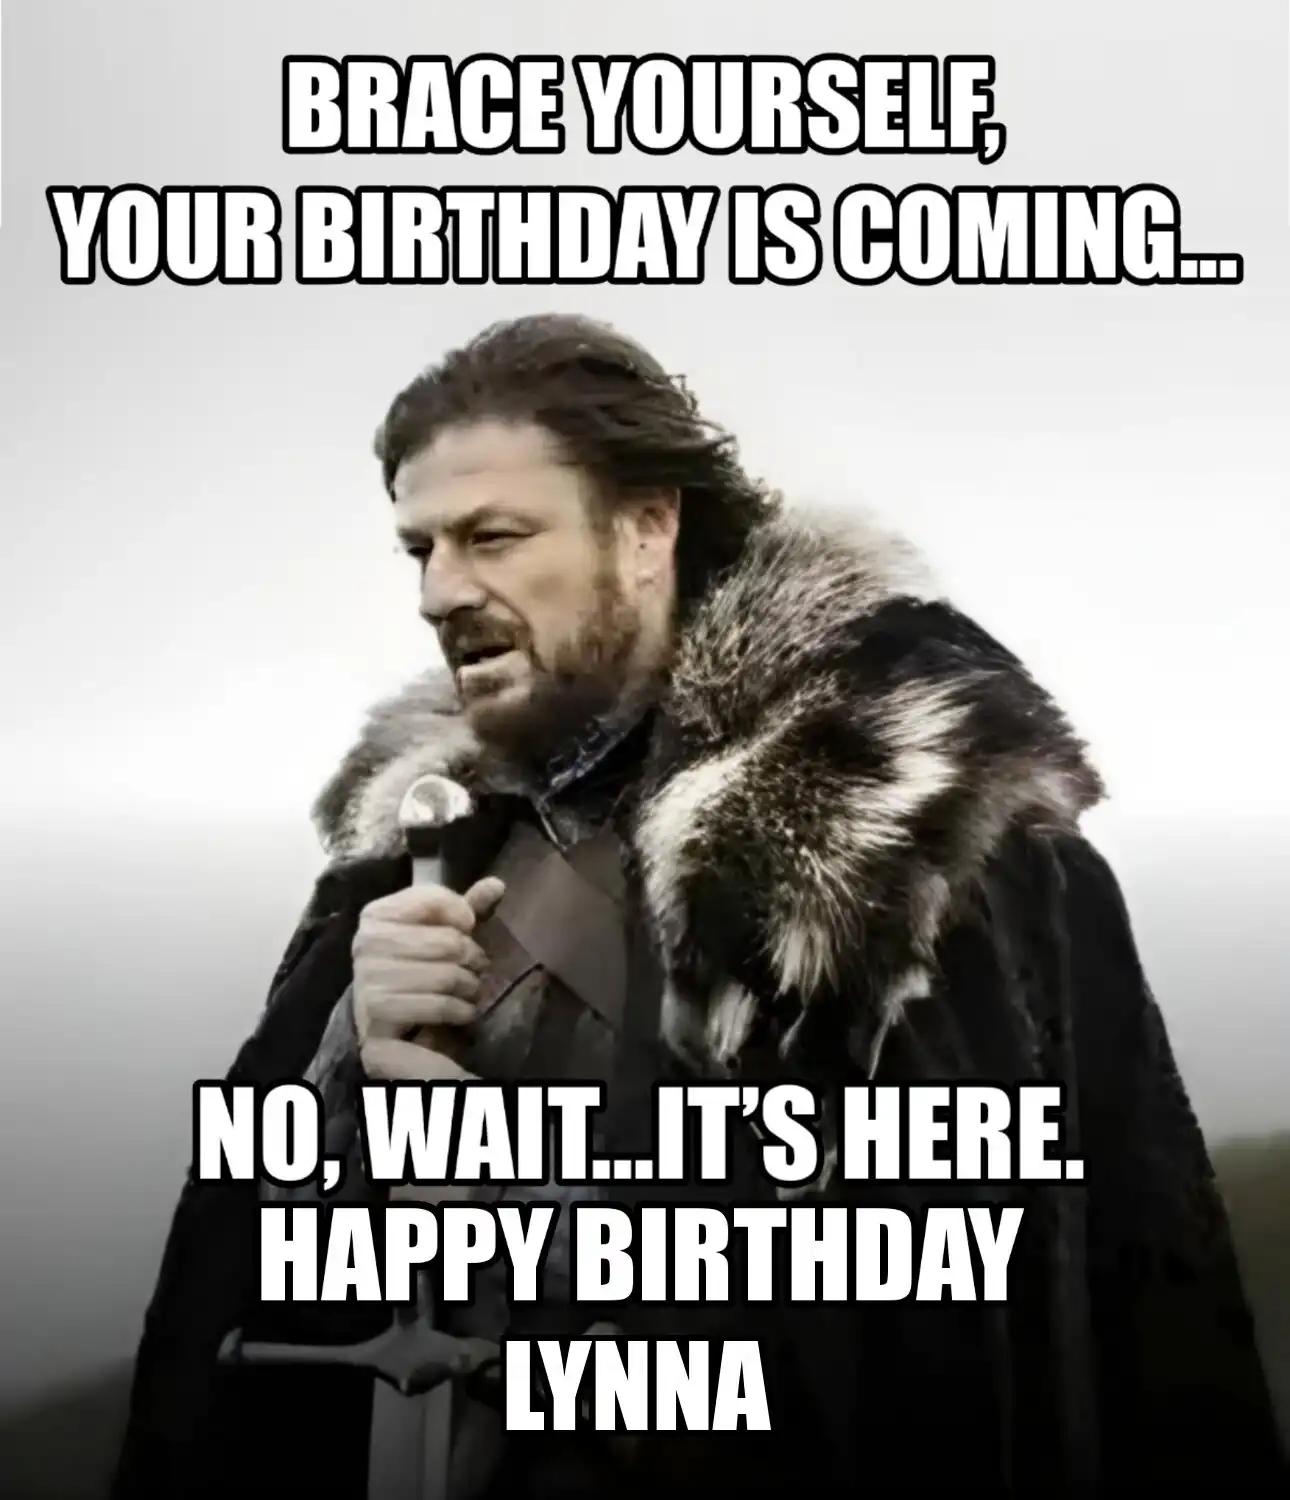 Happy Birthday Lynna Brace Yourself Your Birthday Is Coming Meme